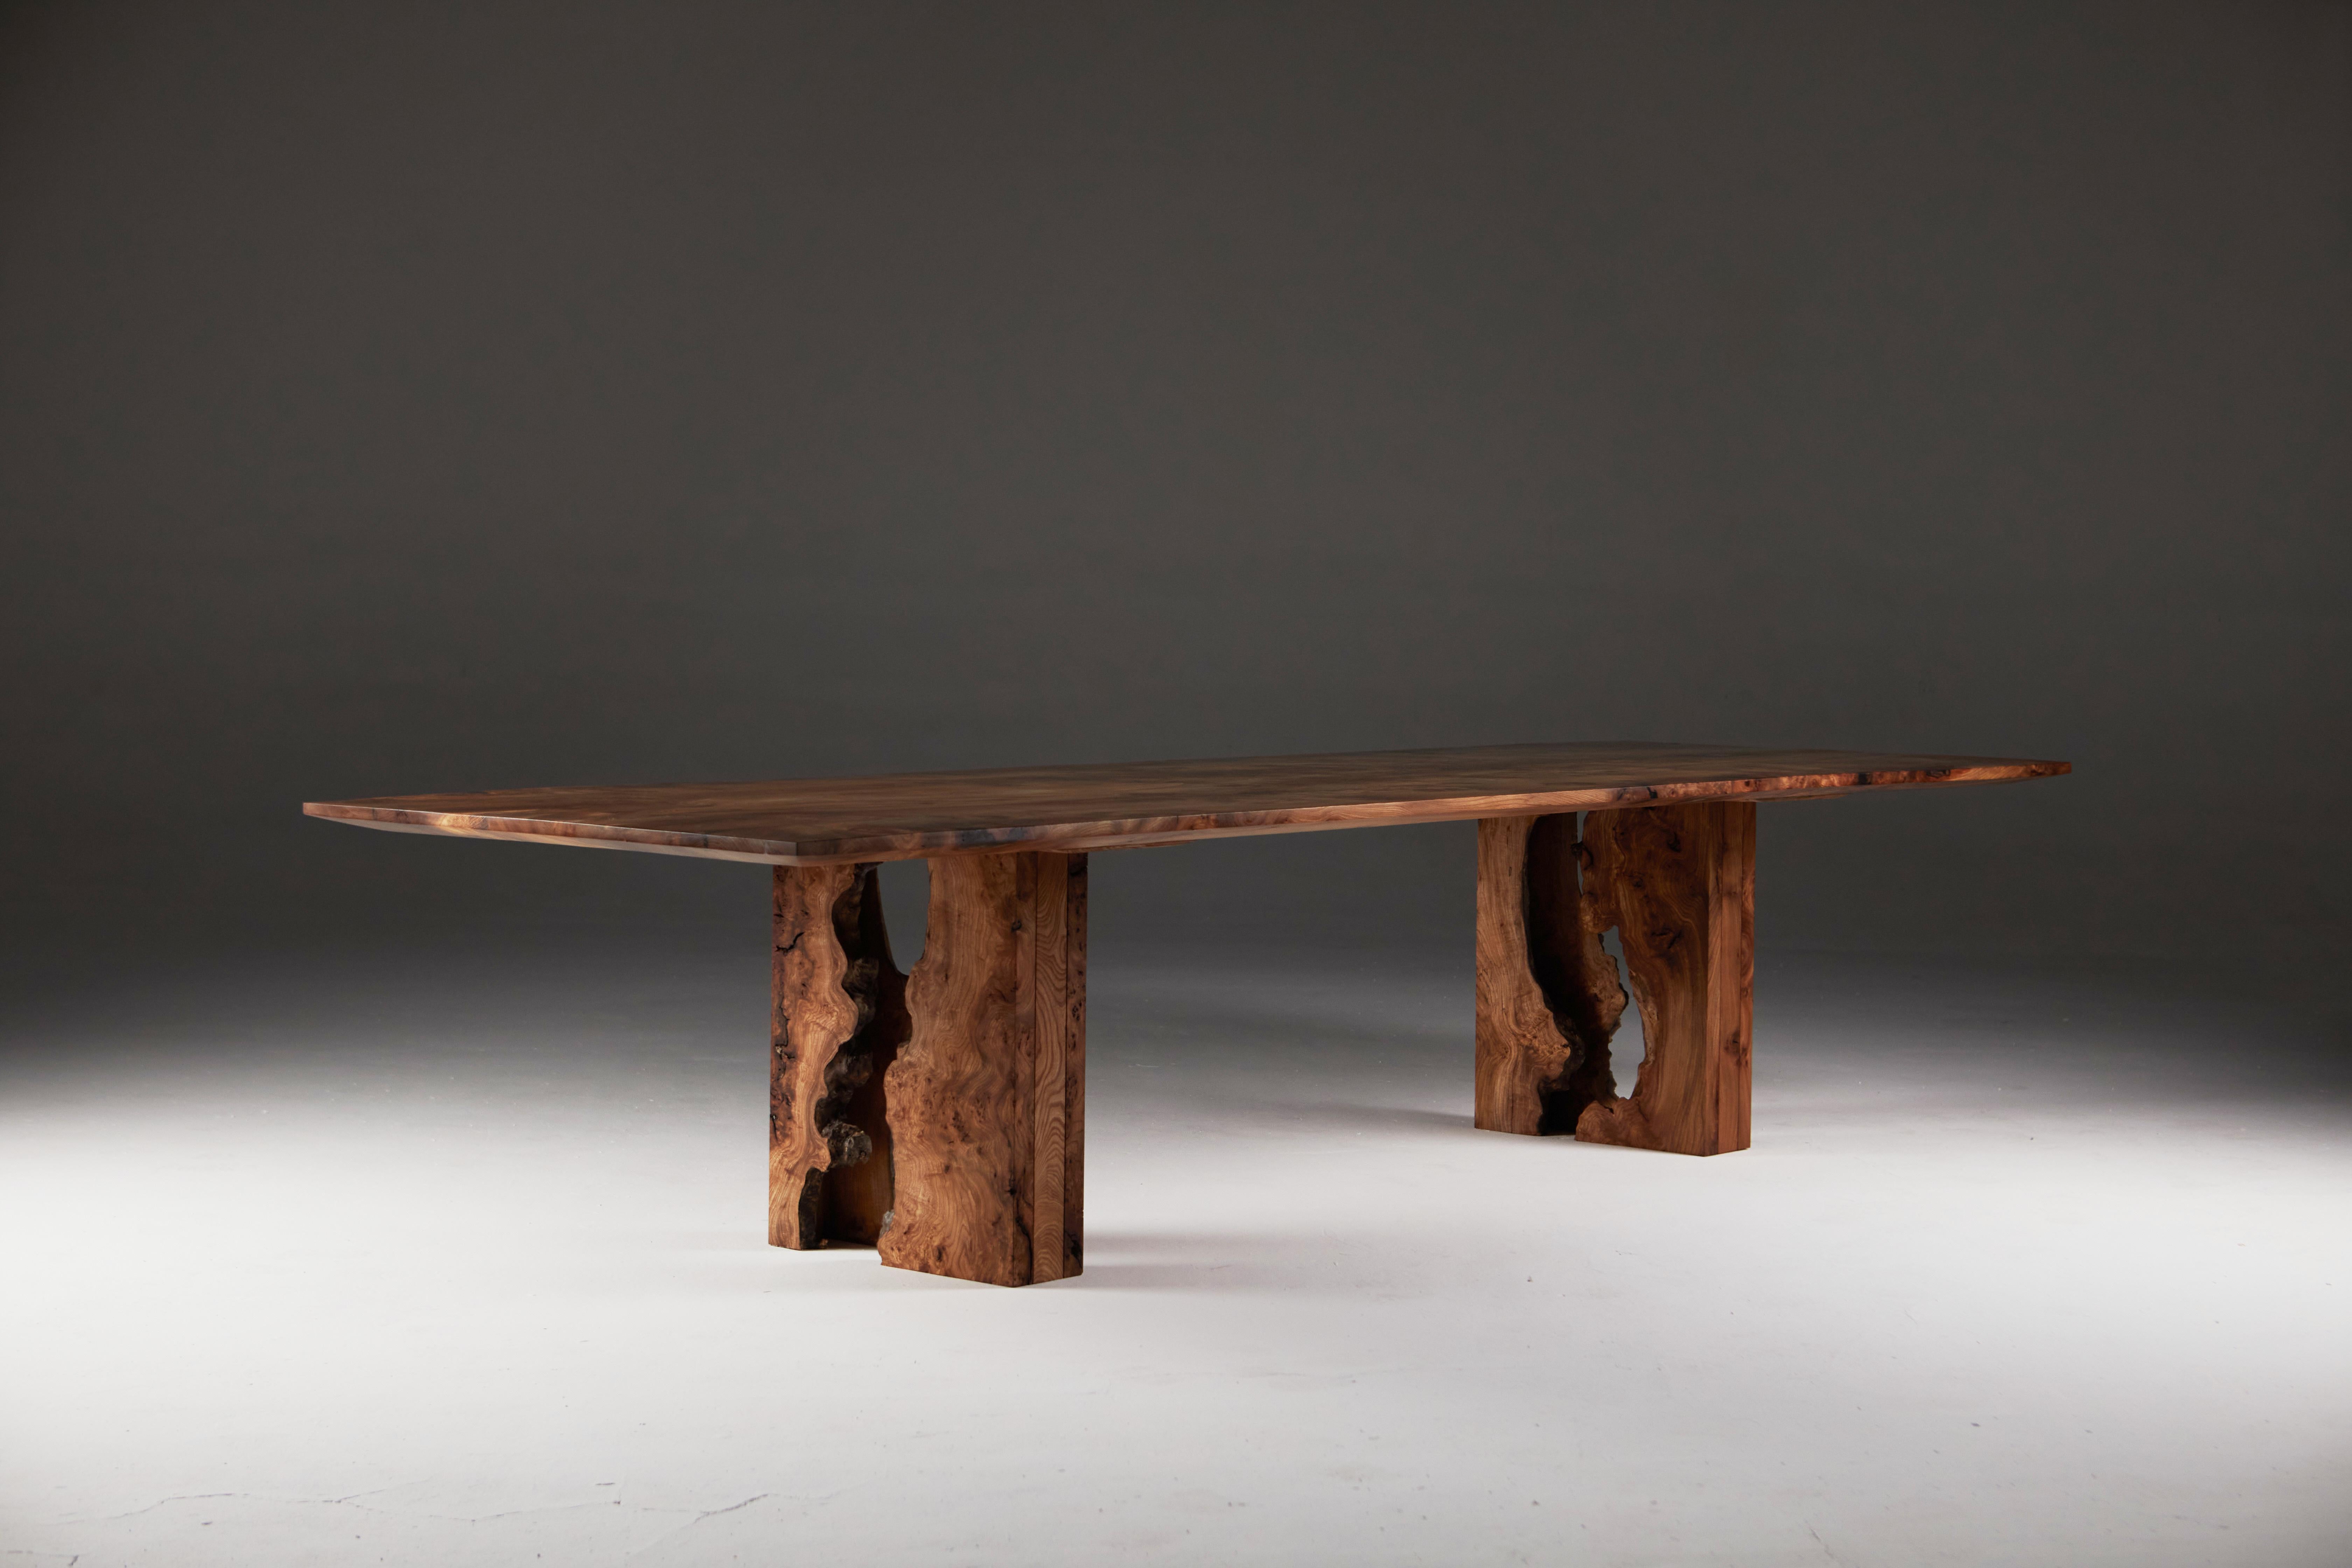 Organic Modern Scottish Burr Elm Table with Inverted Live Edge Legs and Book-matched Top.  For Sale